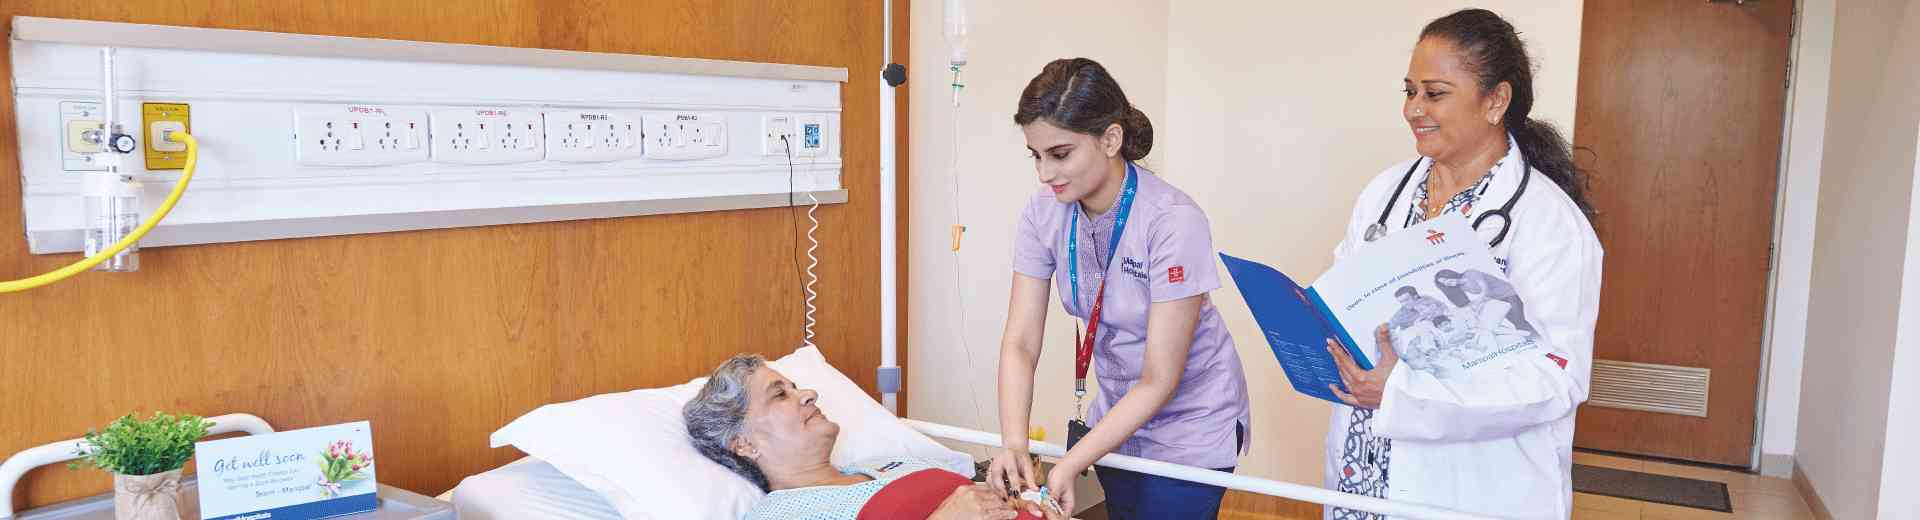 Outpatient Inpatient and Emergency services in Kharadi